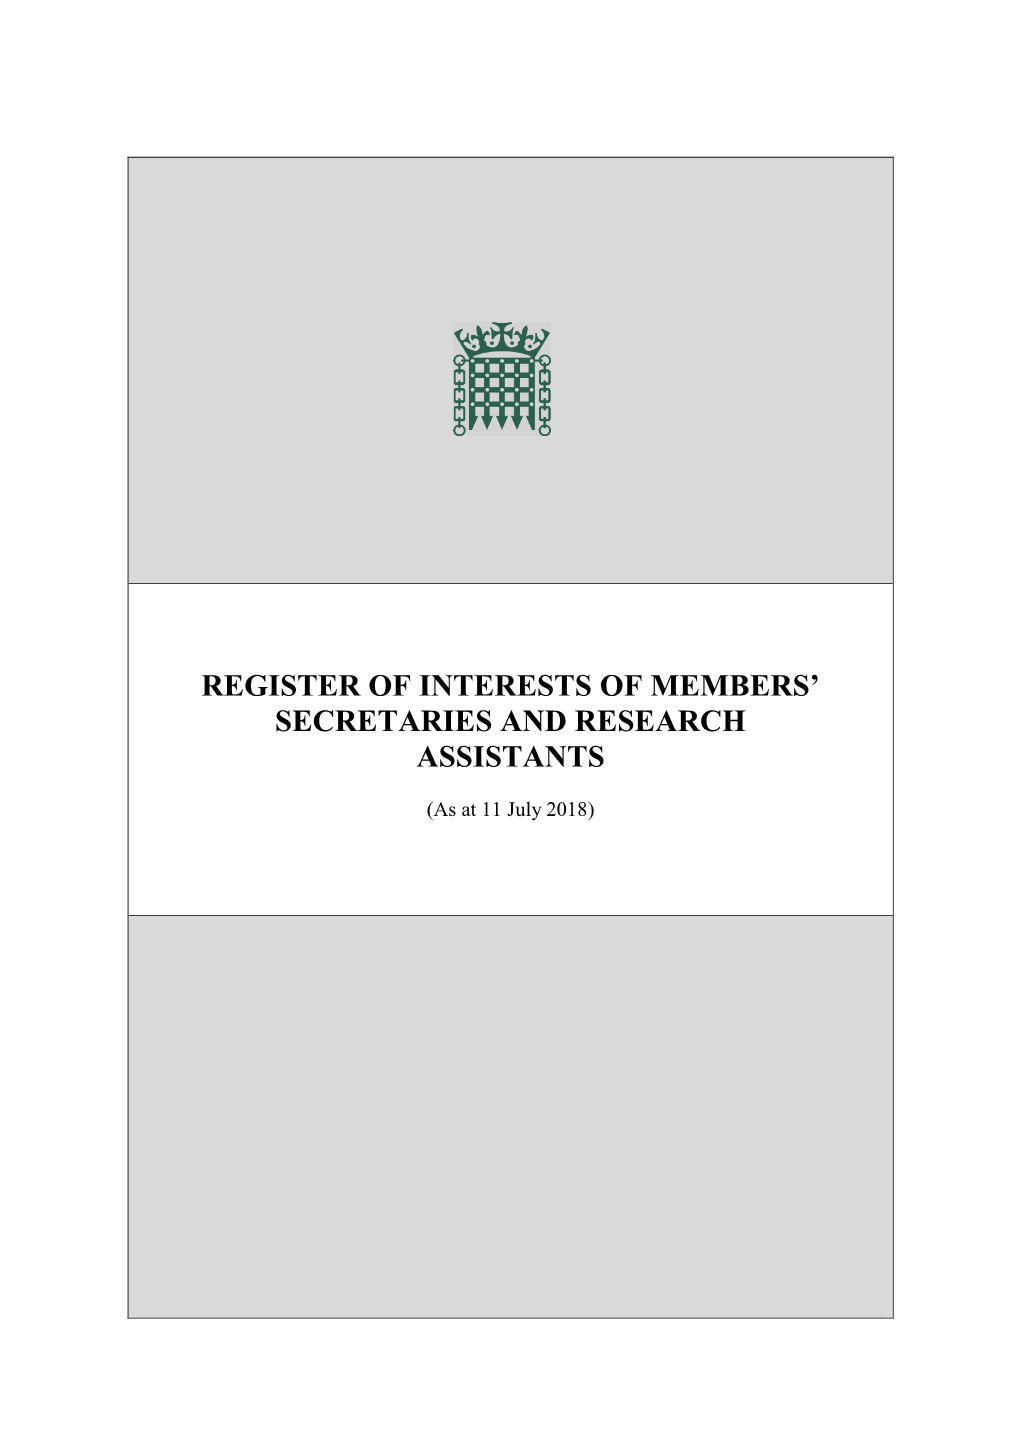 Register of Interests of Members’ Secretaries and Research Assistants